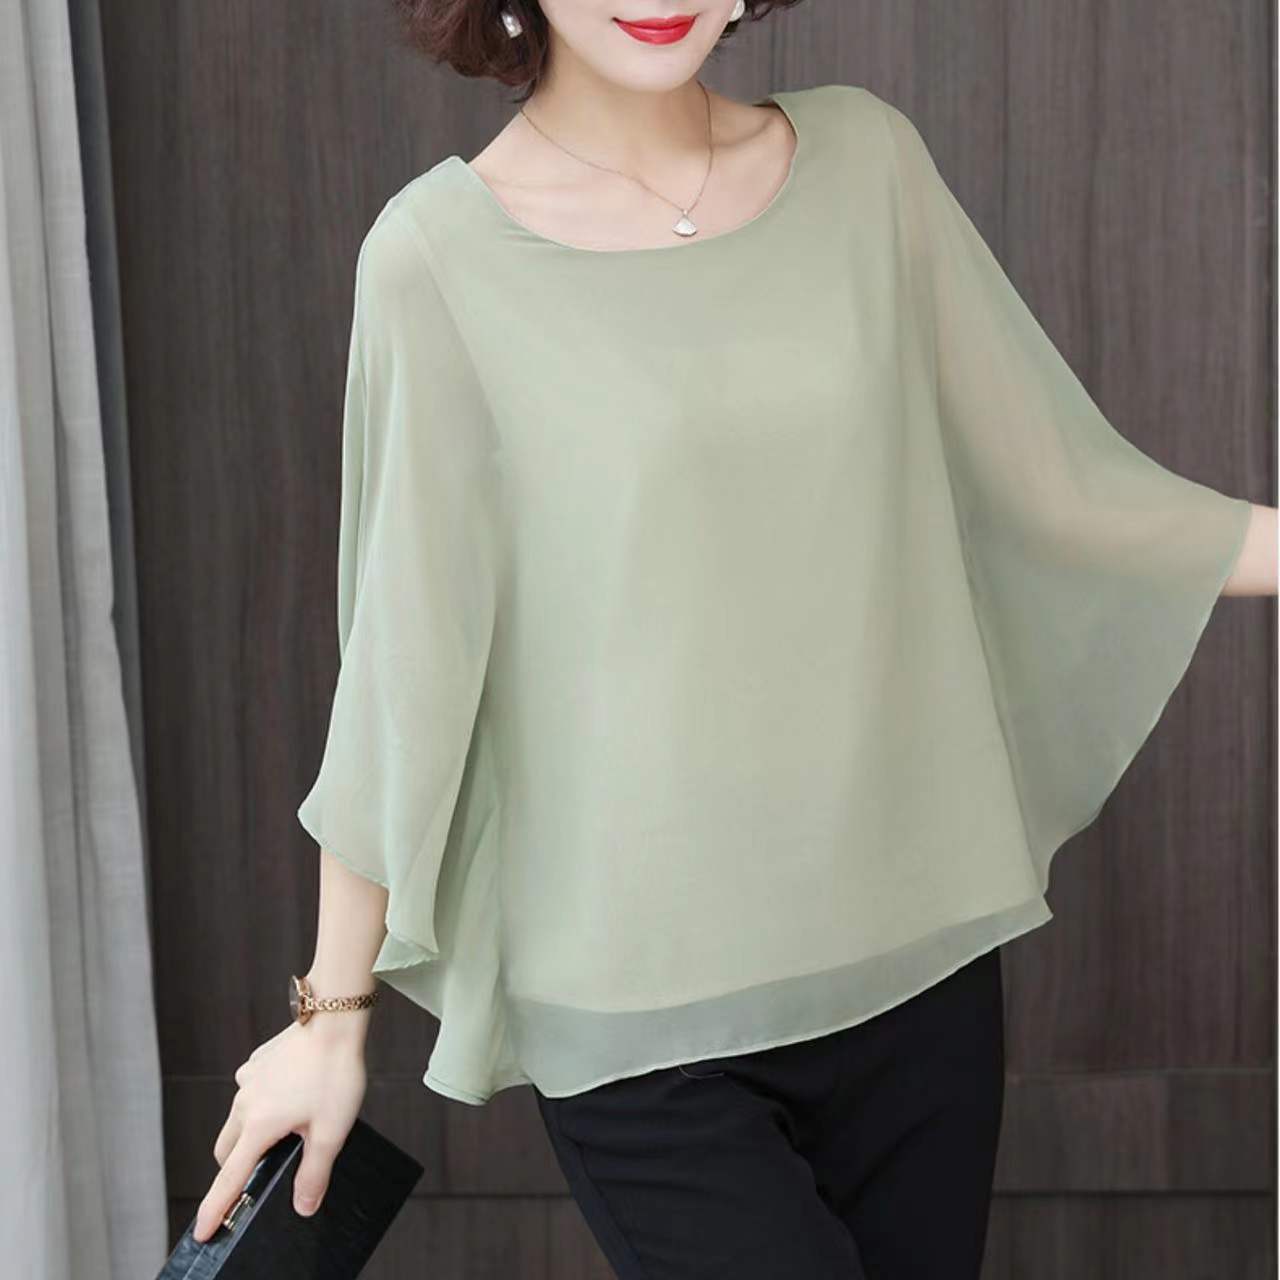 Batwing Shirt Summer Women's Loose T-shirt Small Shirt 2022 Spring and Summer Large Size Anti-Wrinkle Elegant Chiffon All-Matching Super Fairy Top